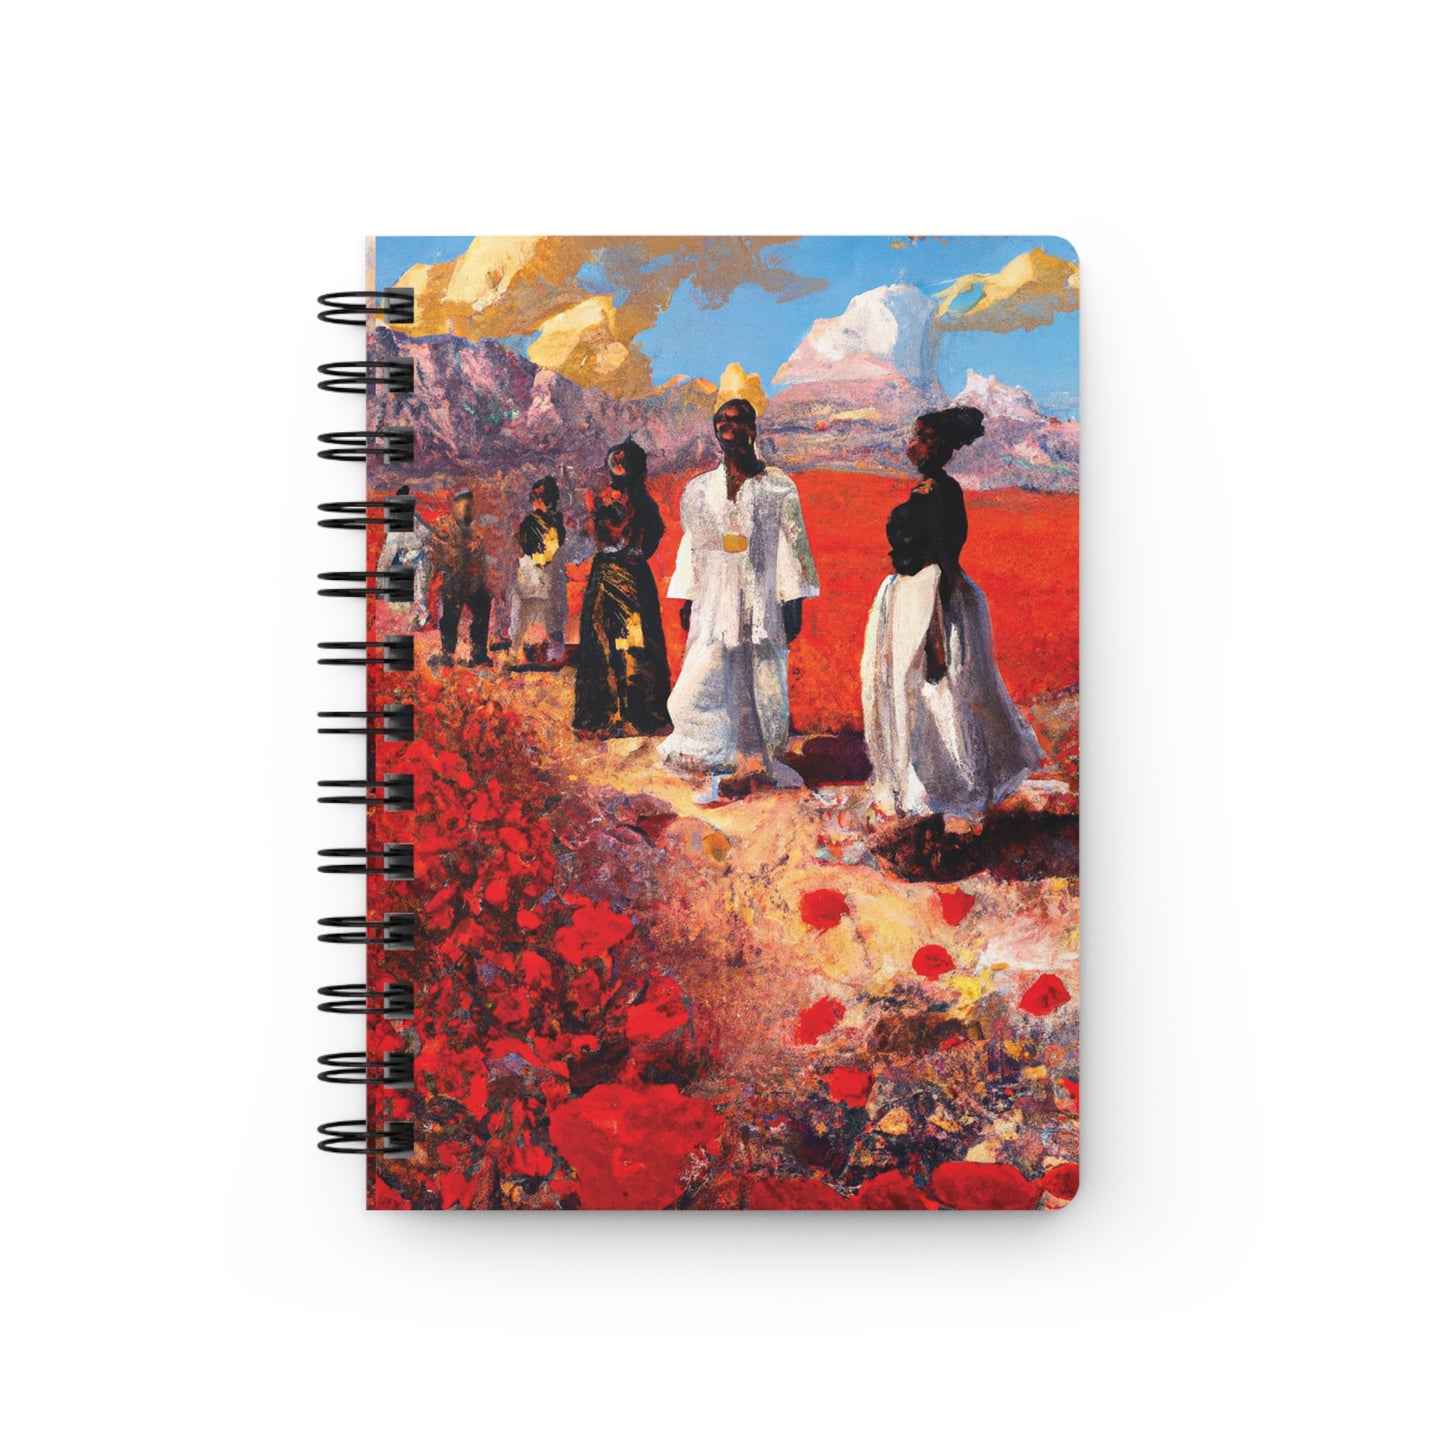 Red Air Spiral Bound Notebooks and Journals with 2023-2024 Year-at-a-Glance Calendar